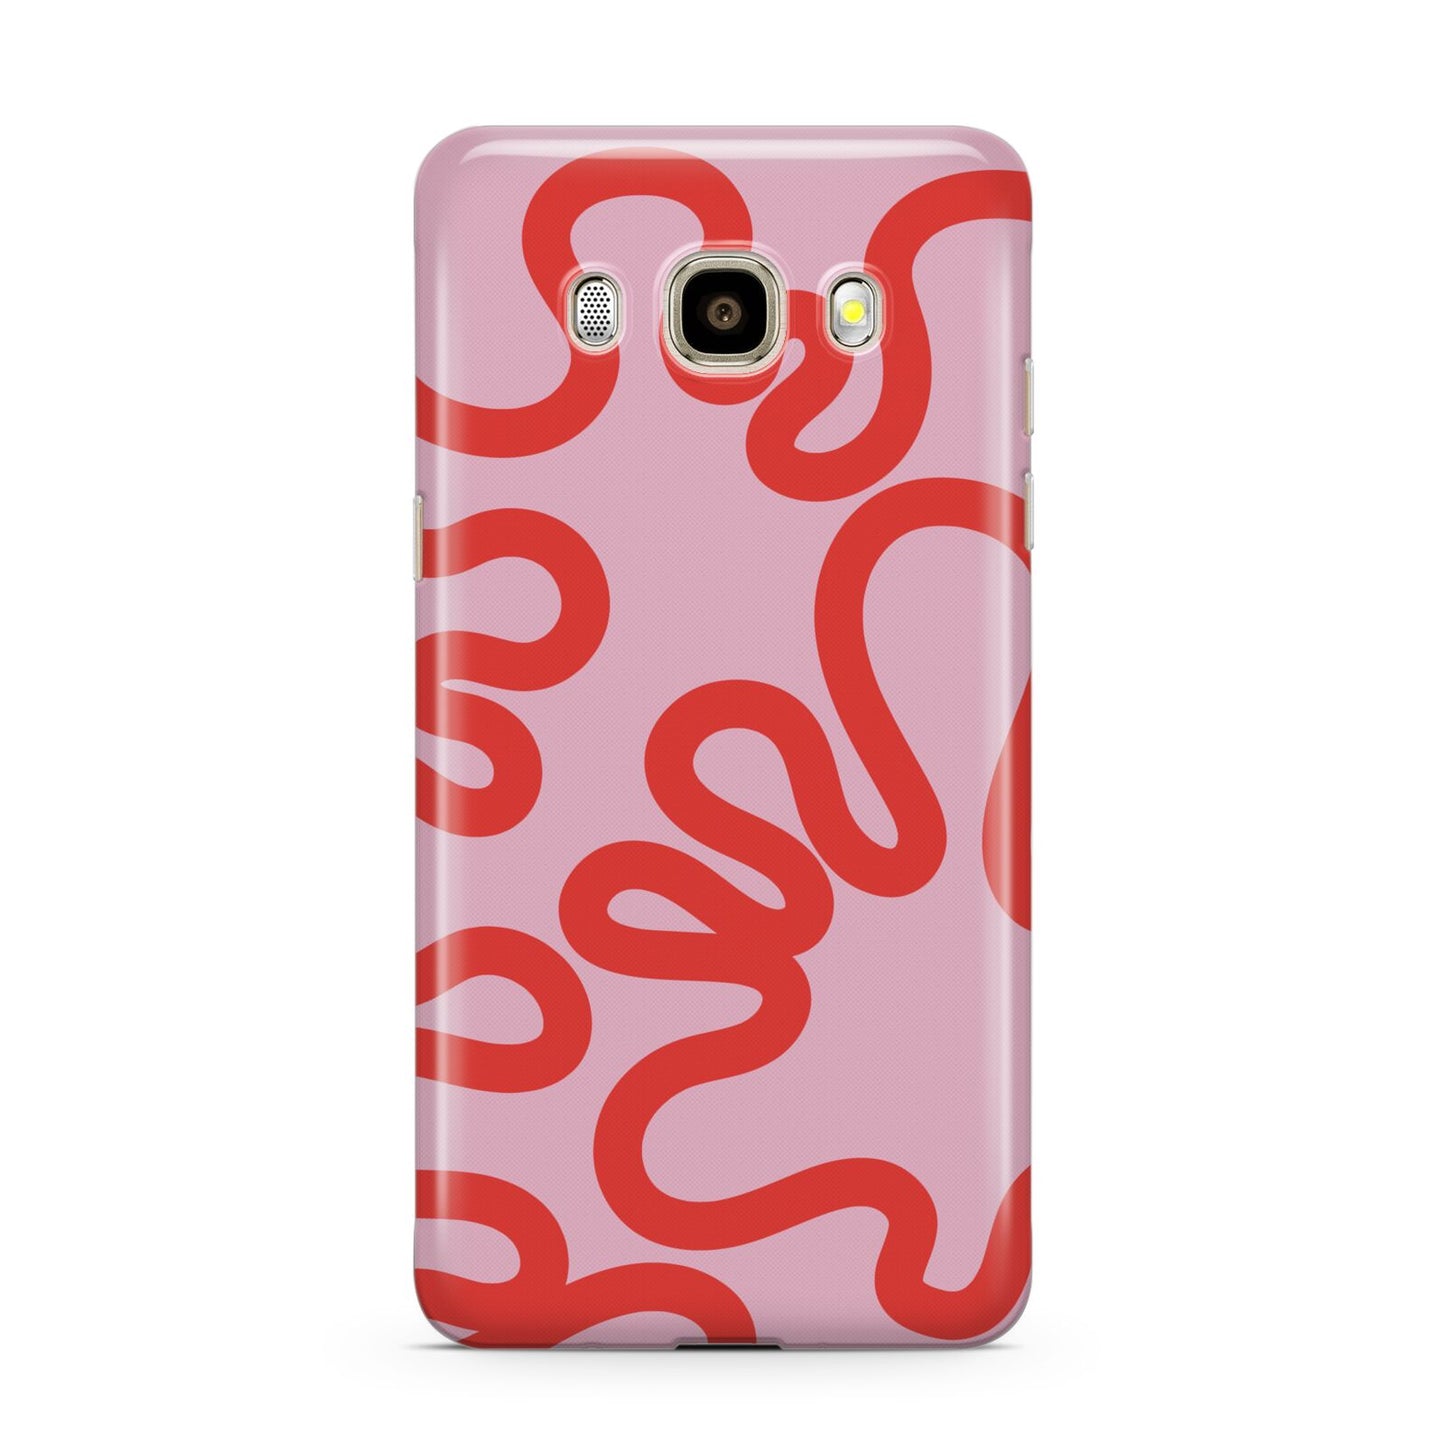 Squiggle Samsung Galaxy J7 2016 Case on gold phone